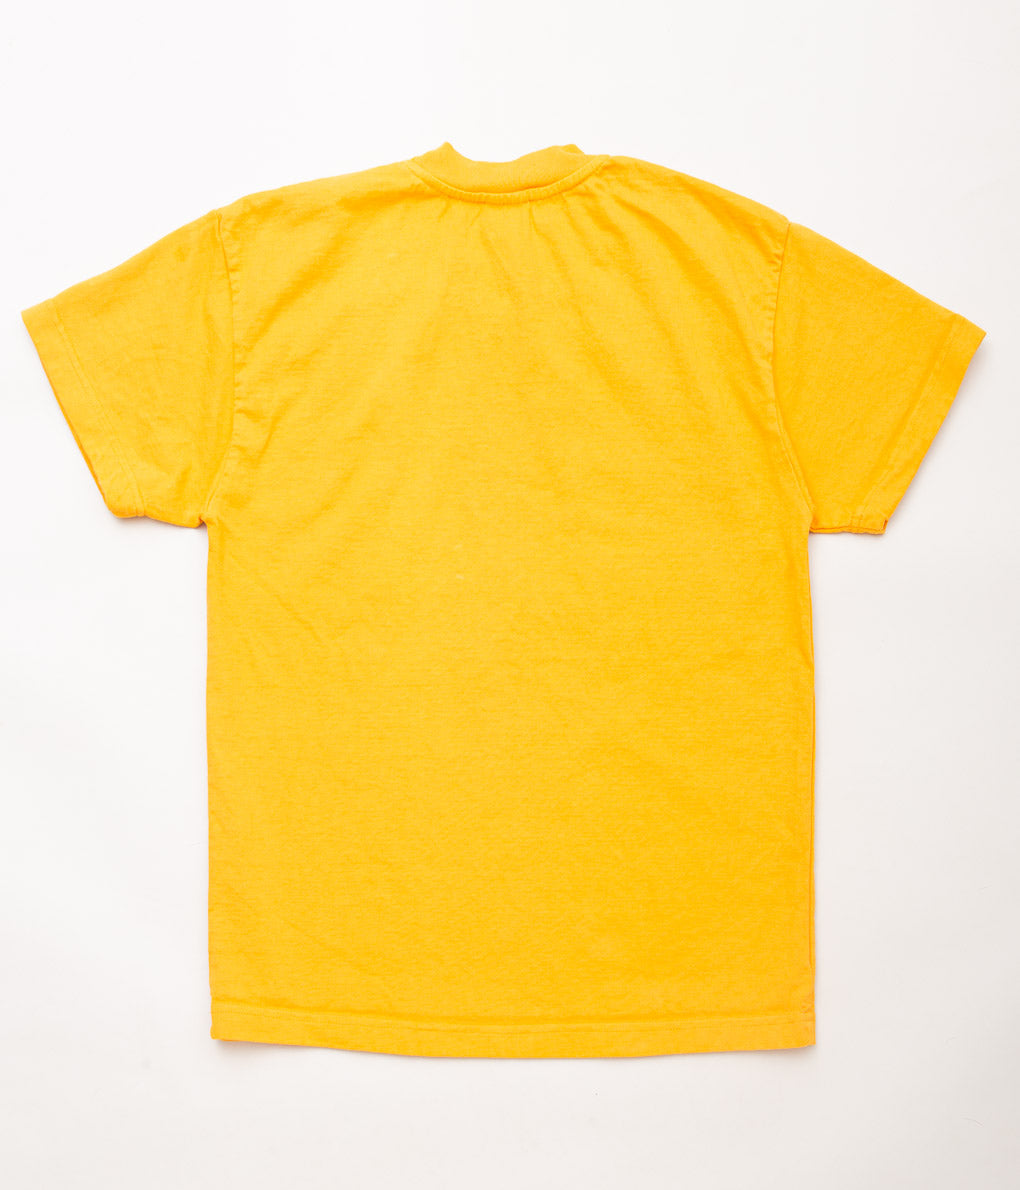 SOFT GOODS ''HEAVY WEIGHT CREWNECK TEE'' (ATHLETIC GOLD)